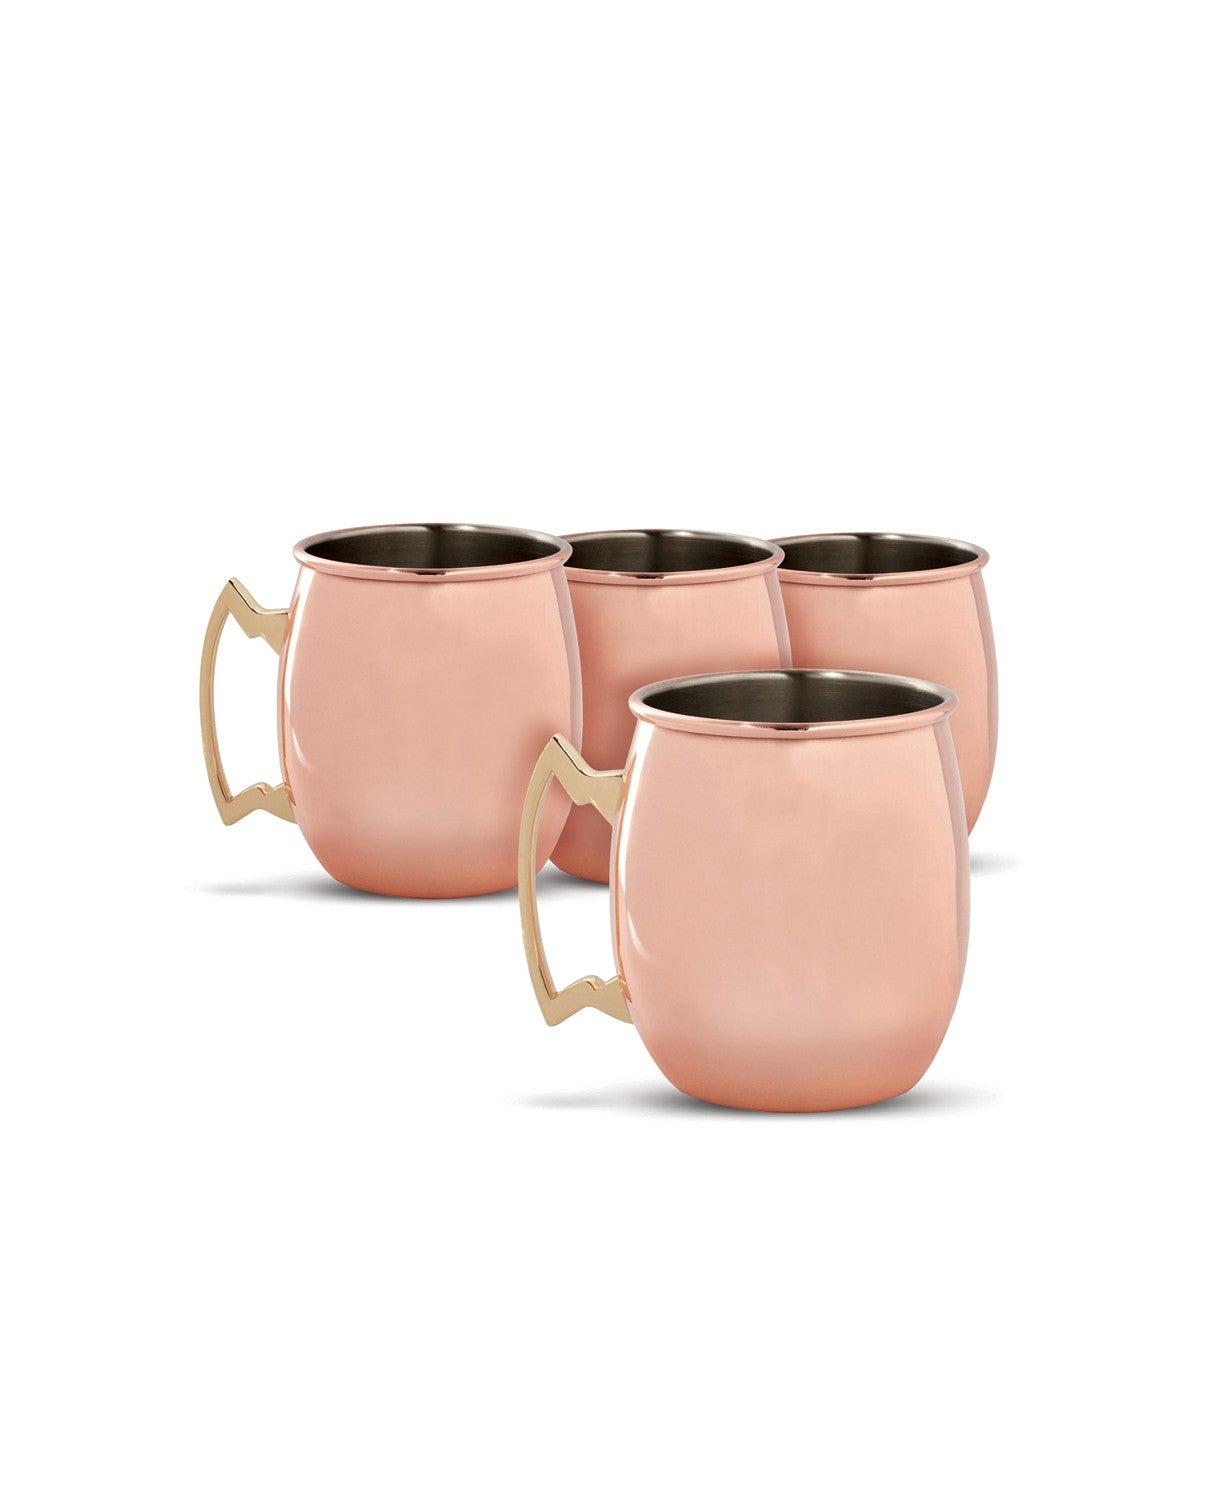 Thirstystone by Cambridge Smooth Copper Moscow Mule Mugs, Set of 4 